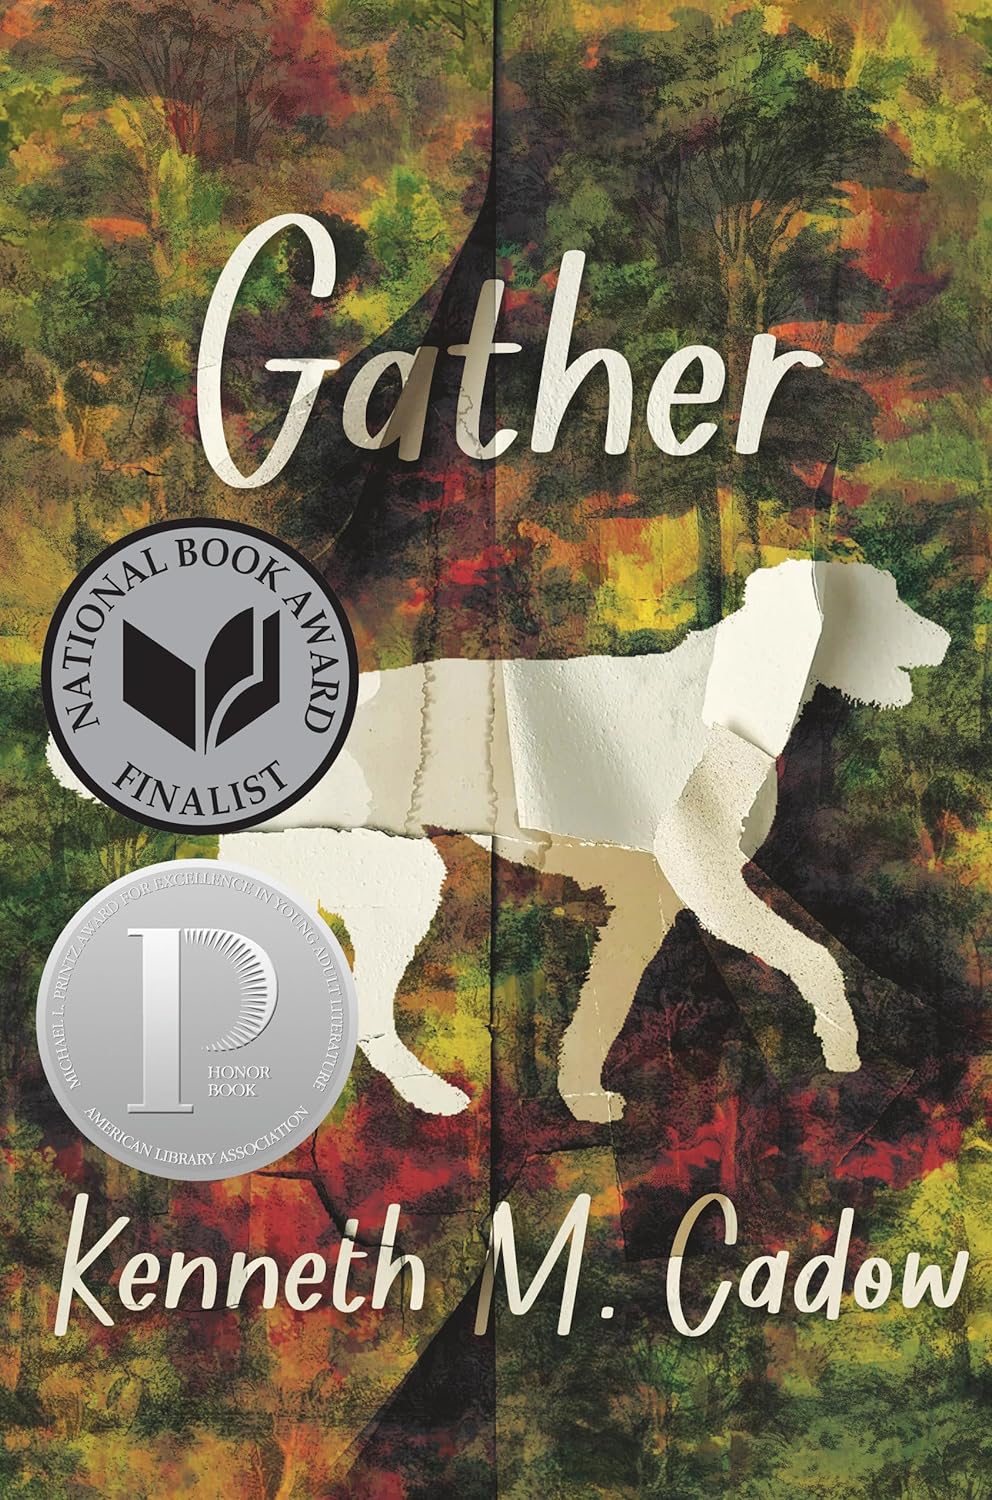 middle school books - Gather by Kenneth Cadow